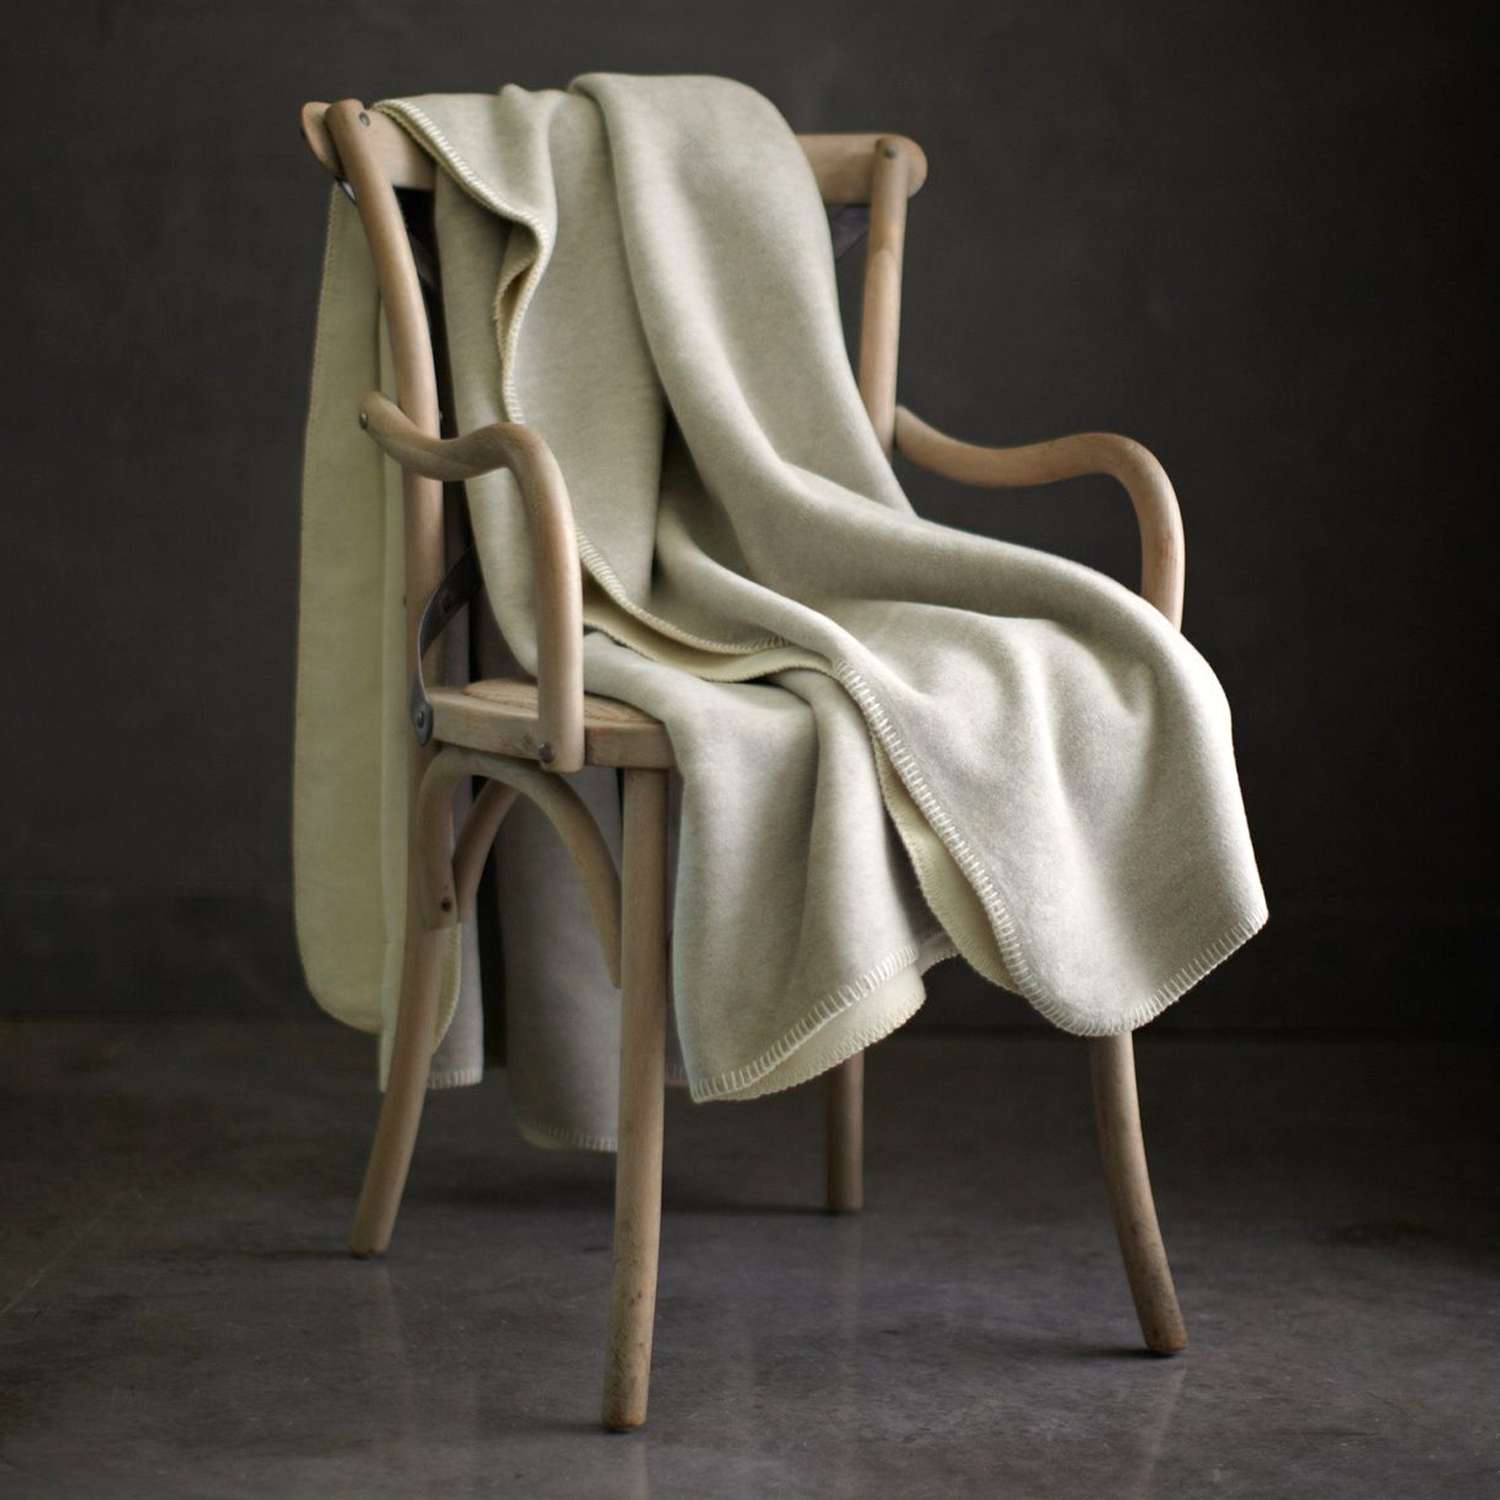 Shop Homethreads Throws and Blankets